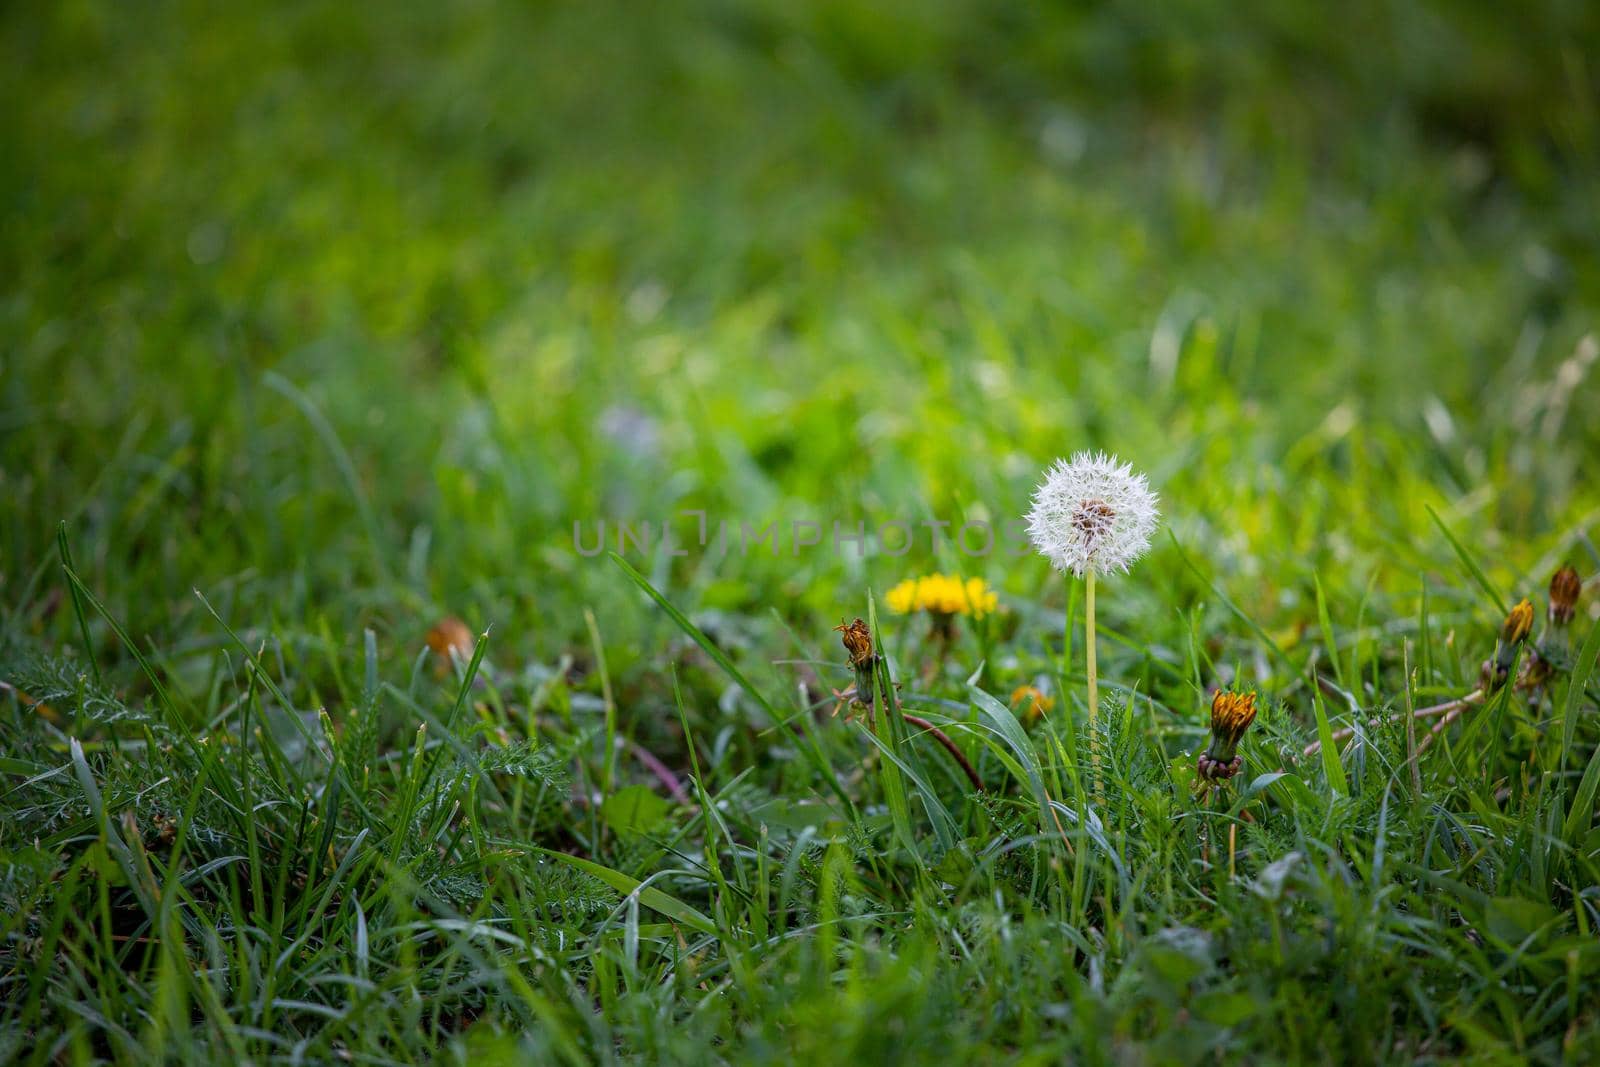 A dandelion flower on a green autumn lawn, against a background of soft sunlight illuminated background.